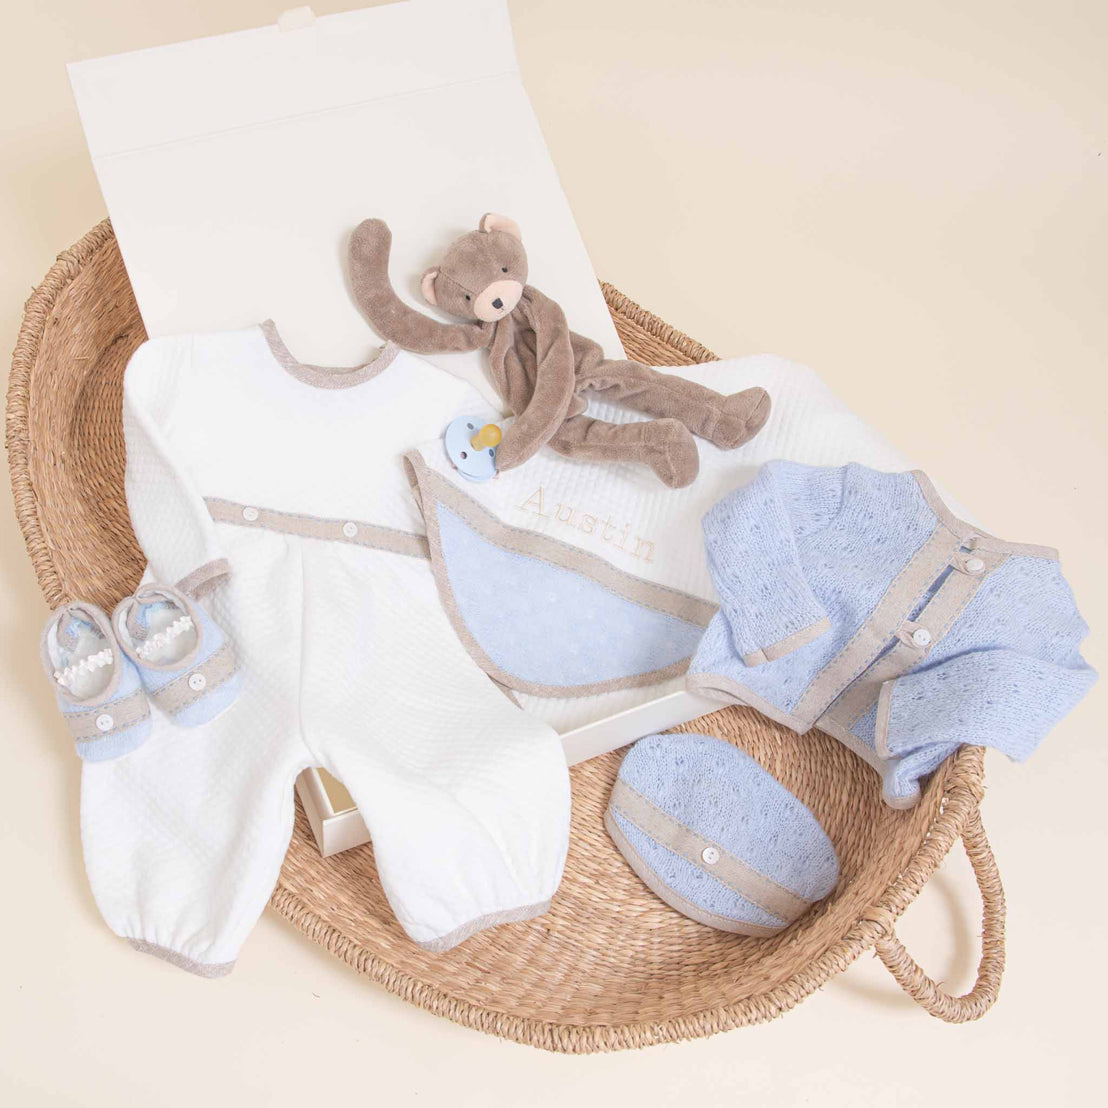 A collection of Austin Newborn Gift Sets in a wicker basket, including a white onesie, a blue knit cardigan, matching booties, and a plush bear toy.